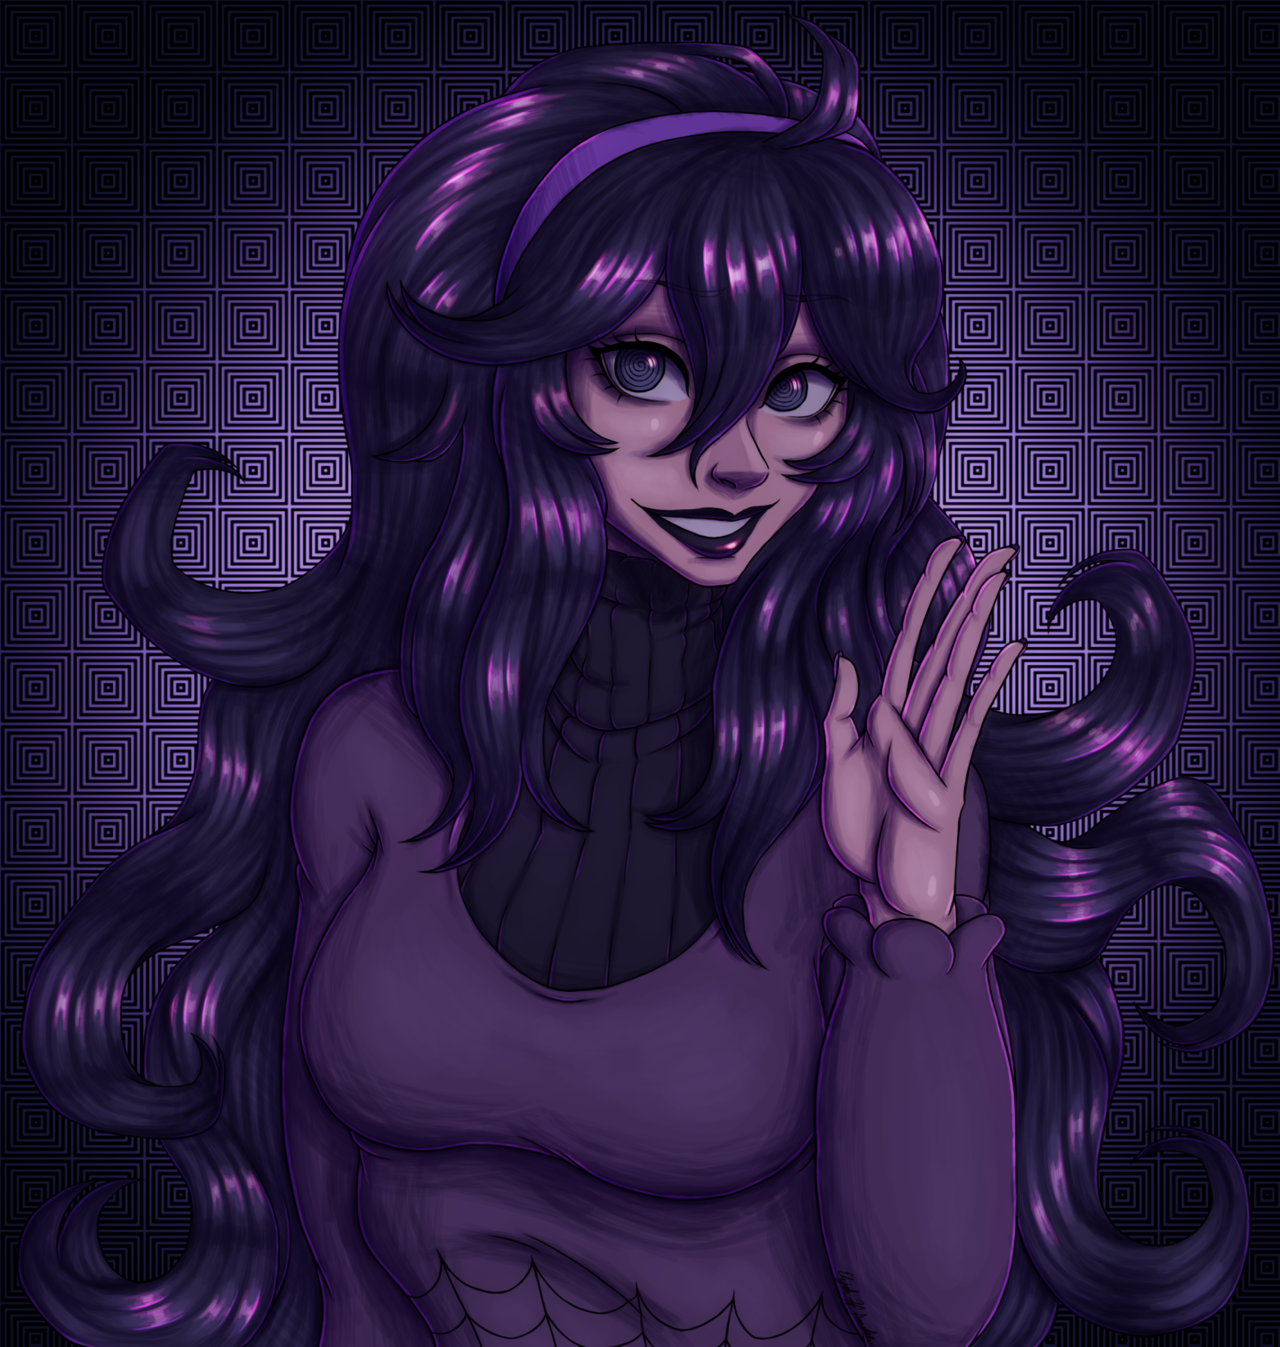 xmrnothingx: Hex Maniac from Pokemon I really like Ghost type pokemon and, by extension,